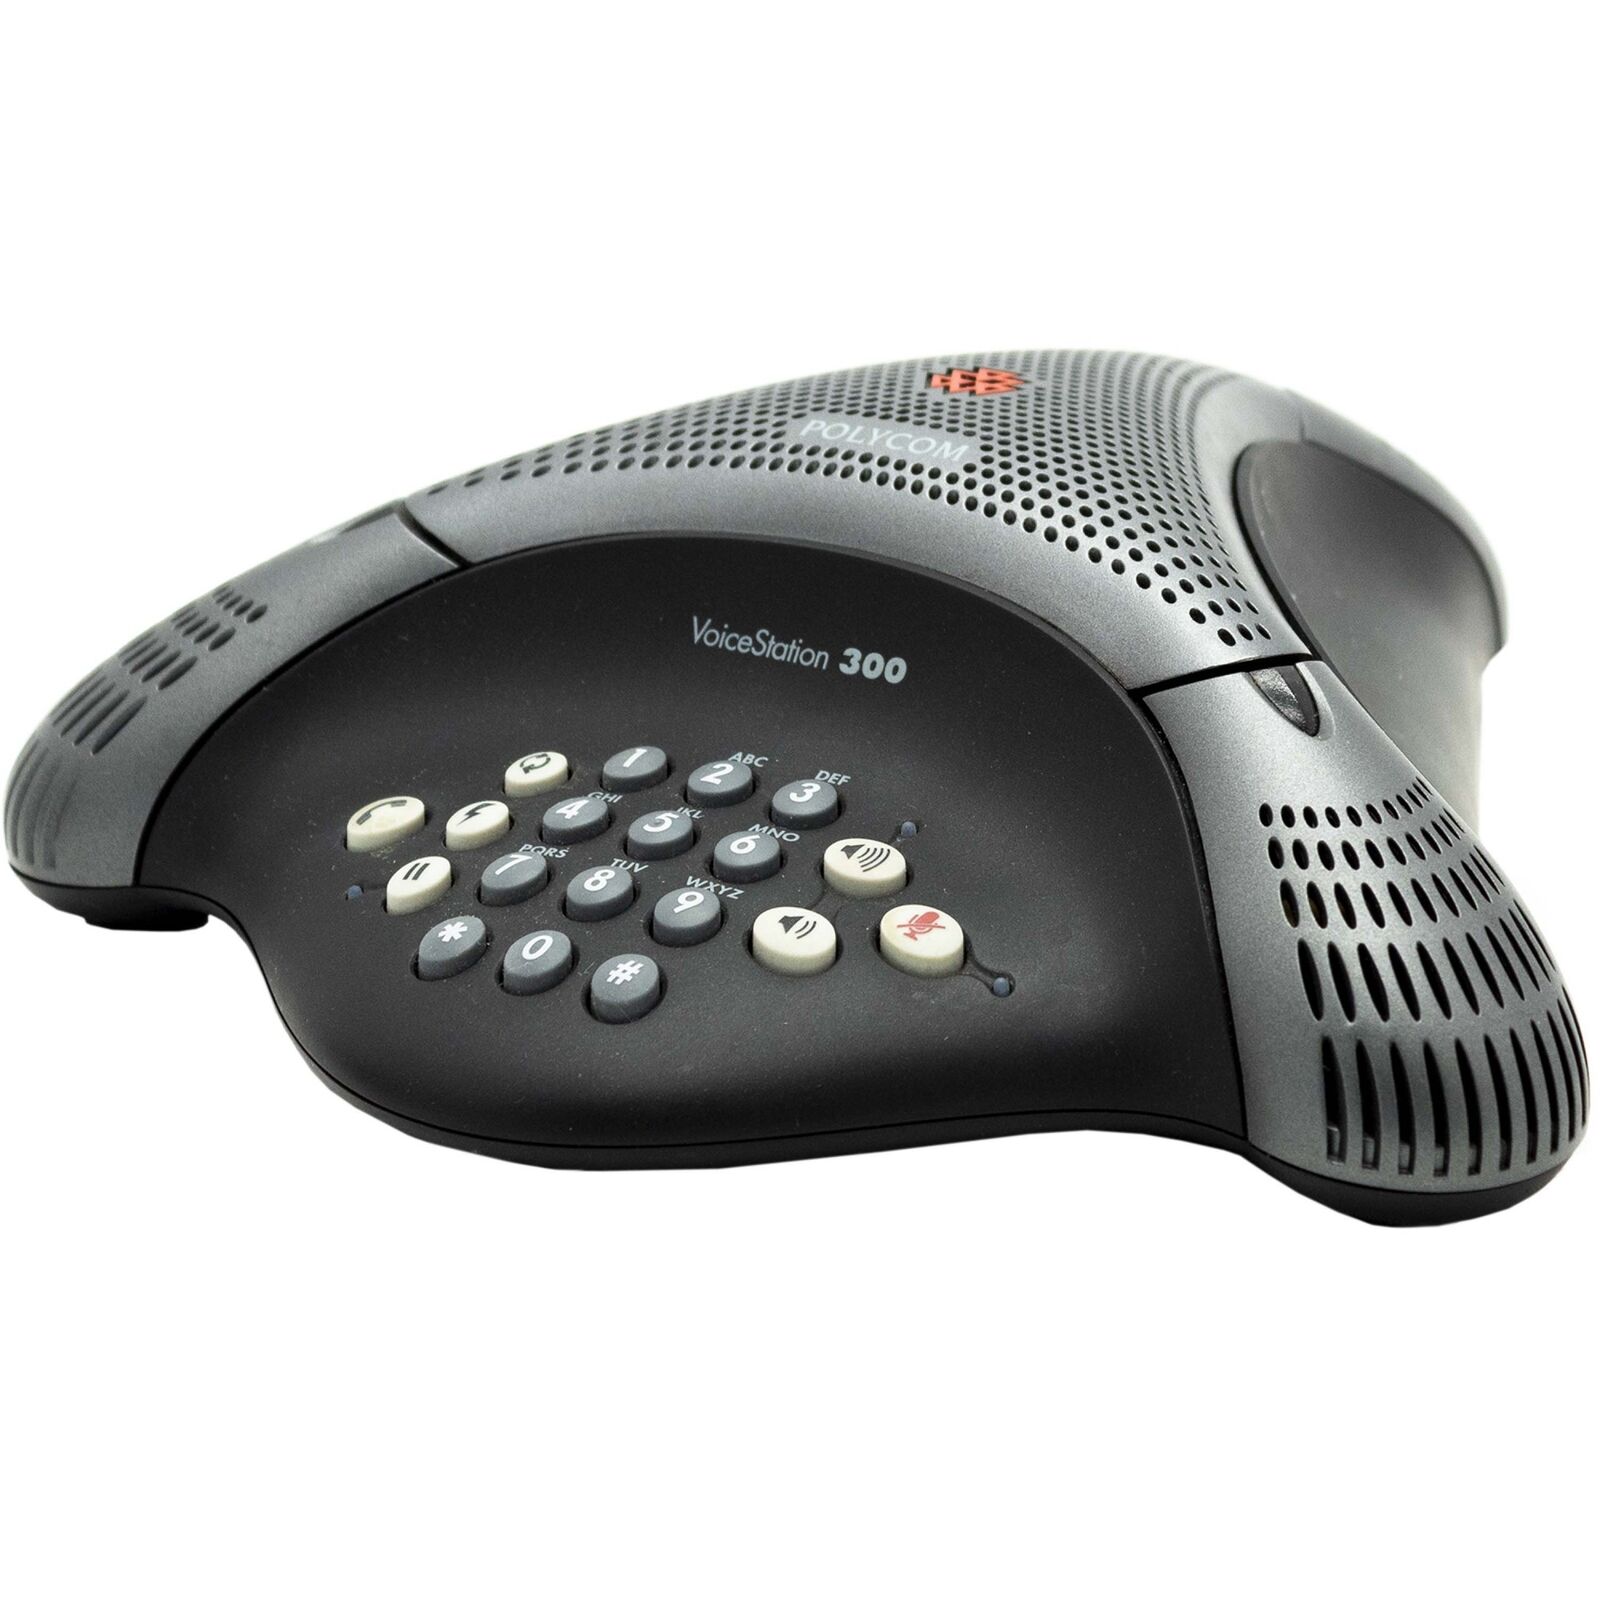 Polycom Voicestation 300 Phone Conference Keypad Voip IP P[Reconditioned